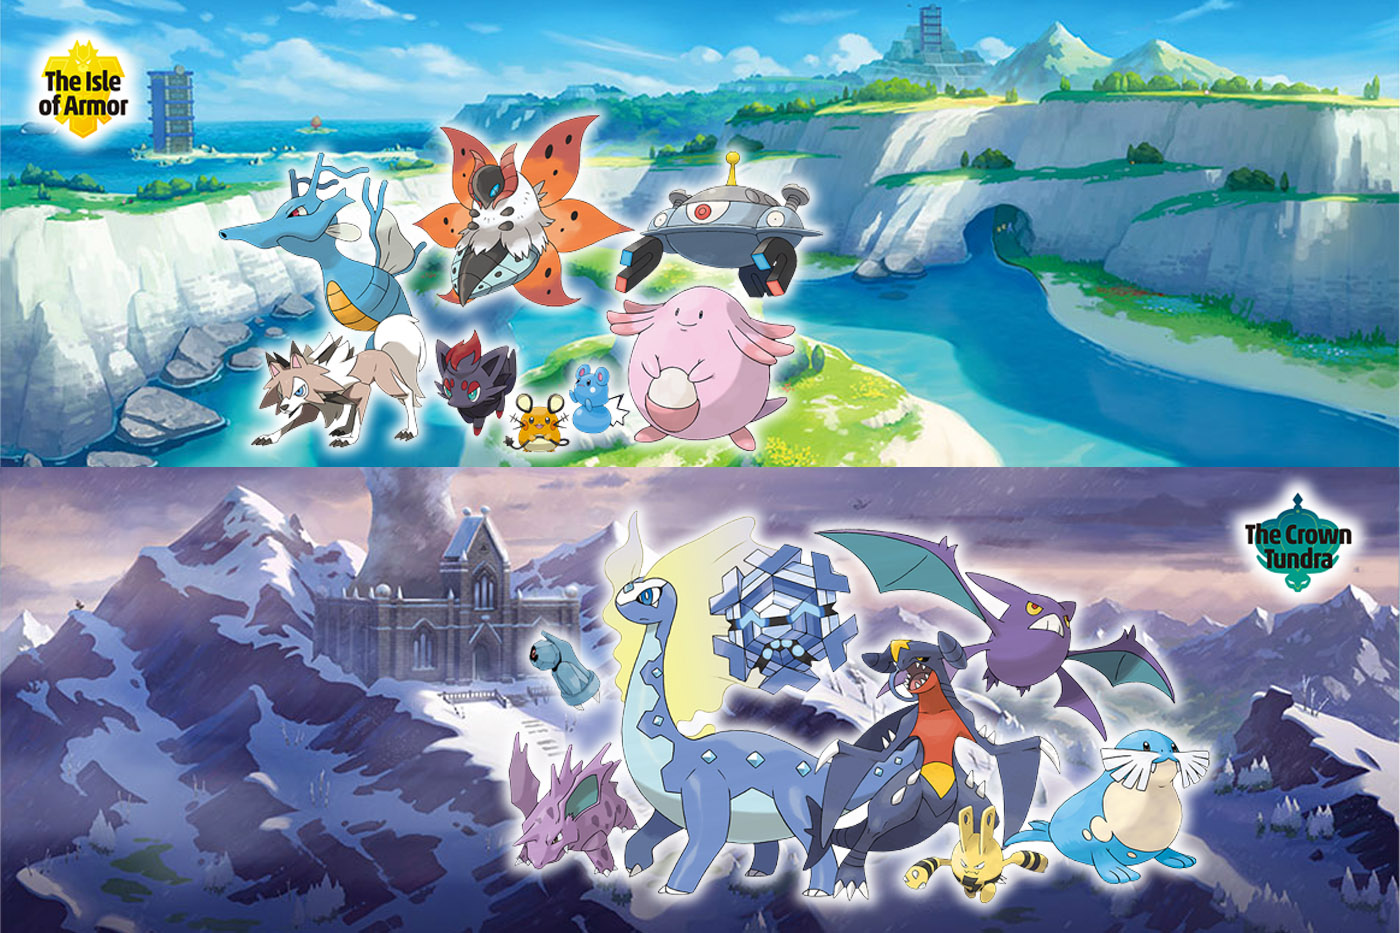 Legendary Pokemon in Sword and Shield The Crown Tundra Expansion